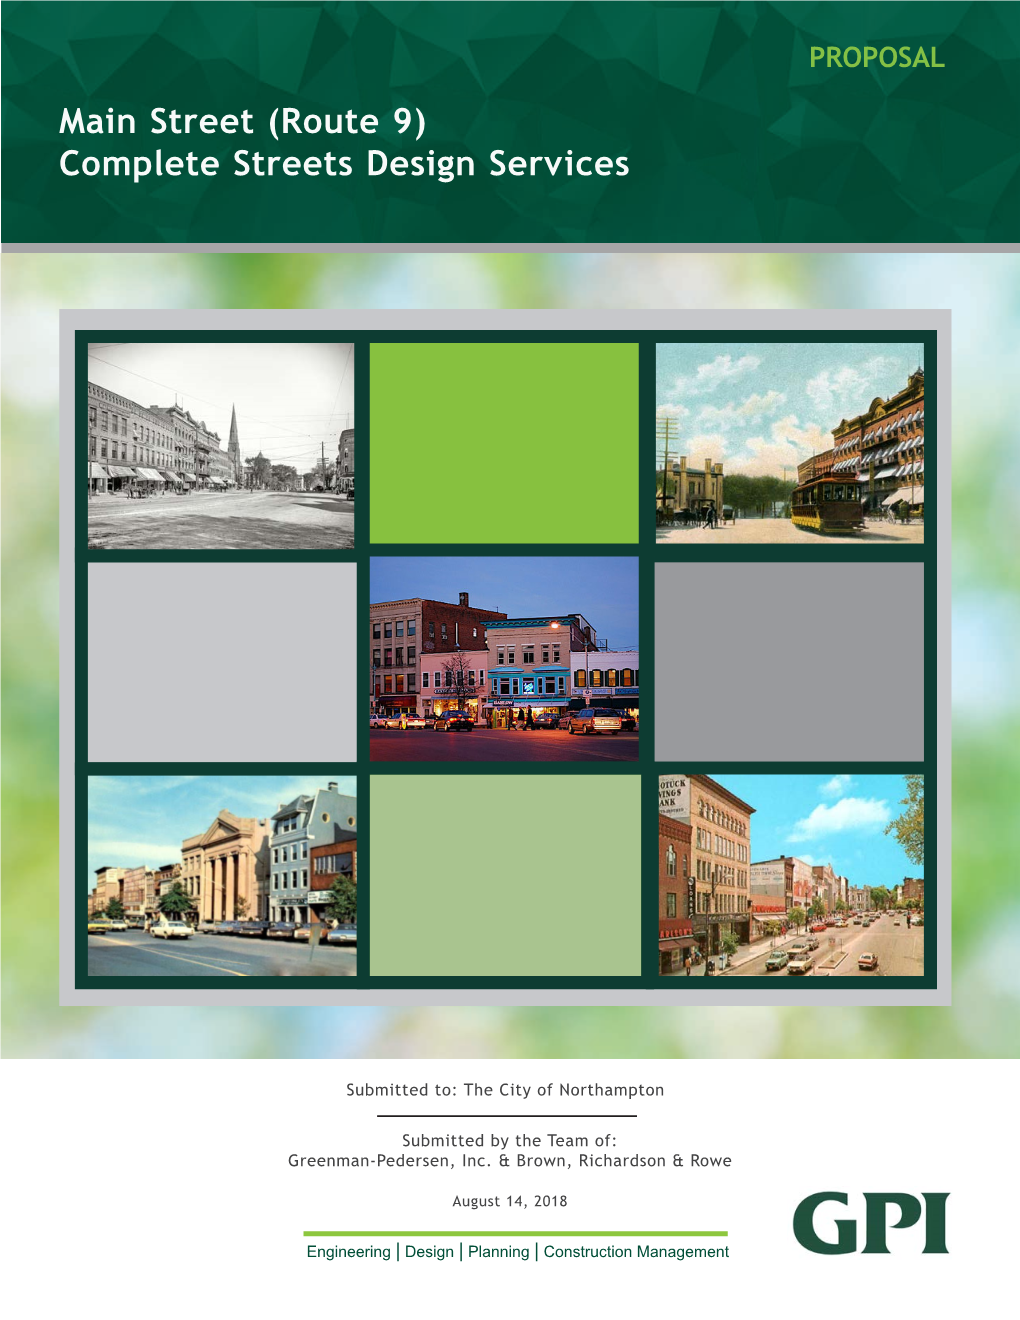 GPI) Is Excited About the Opportunity to Continue Working with the City of Northampton to Provide Complete Streets Design Services for Main Street (Route 9)